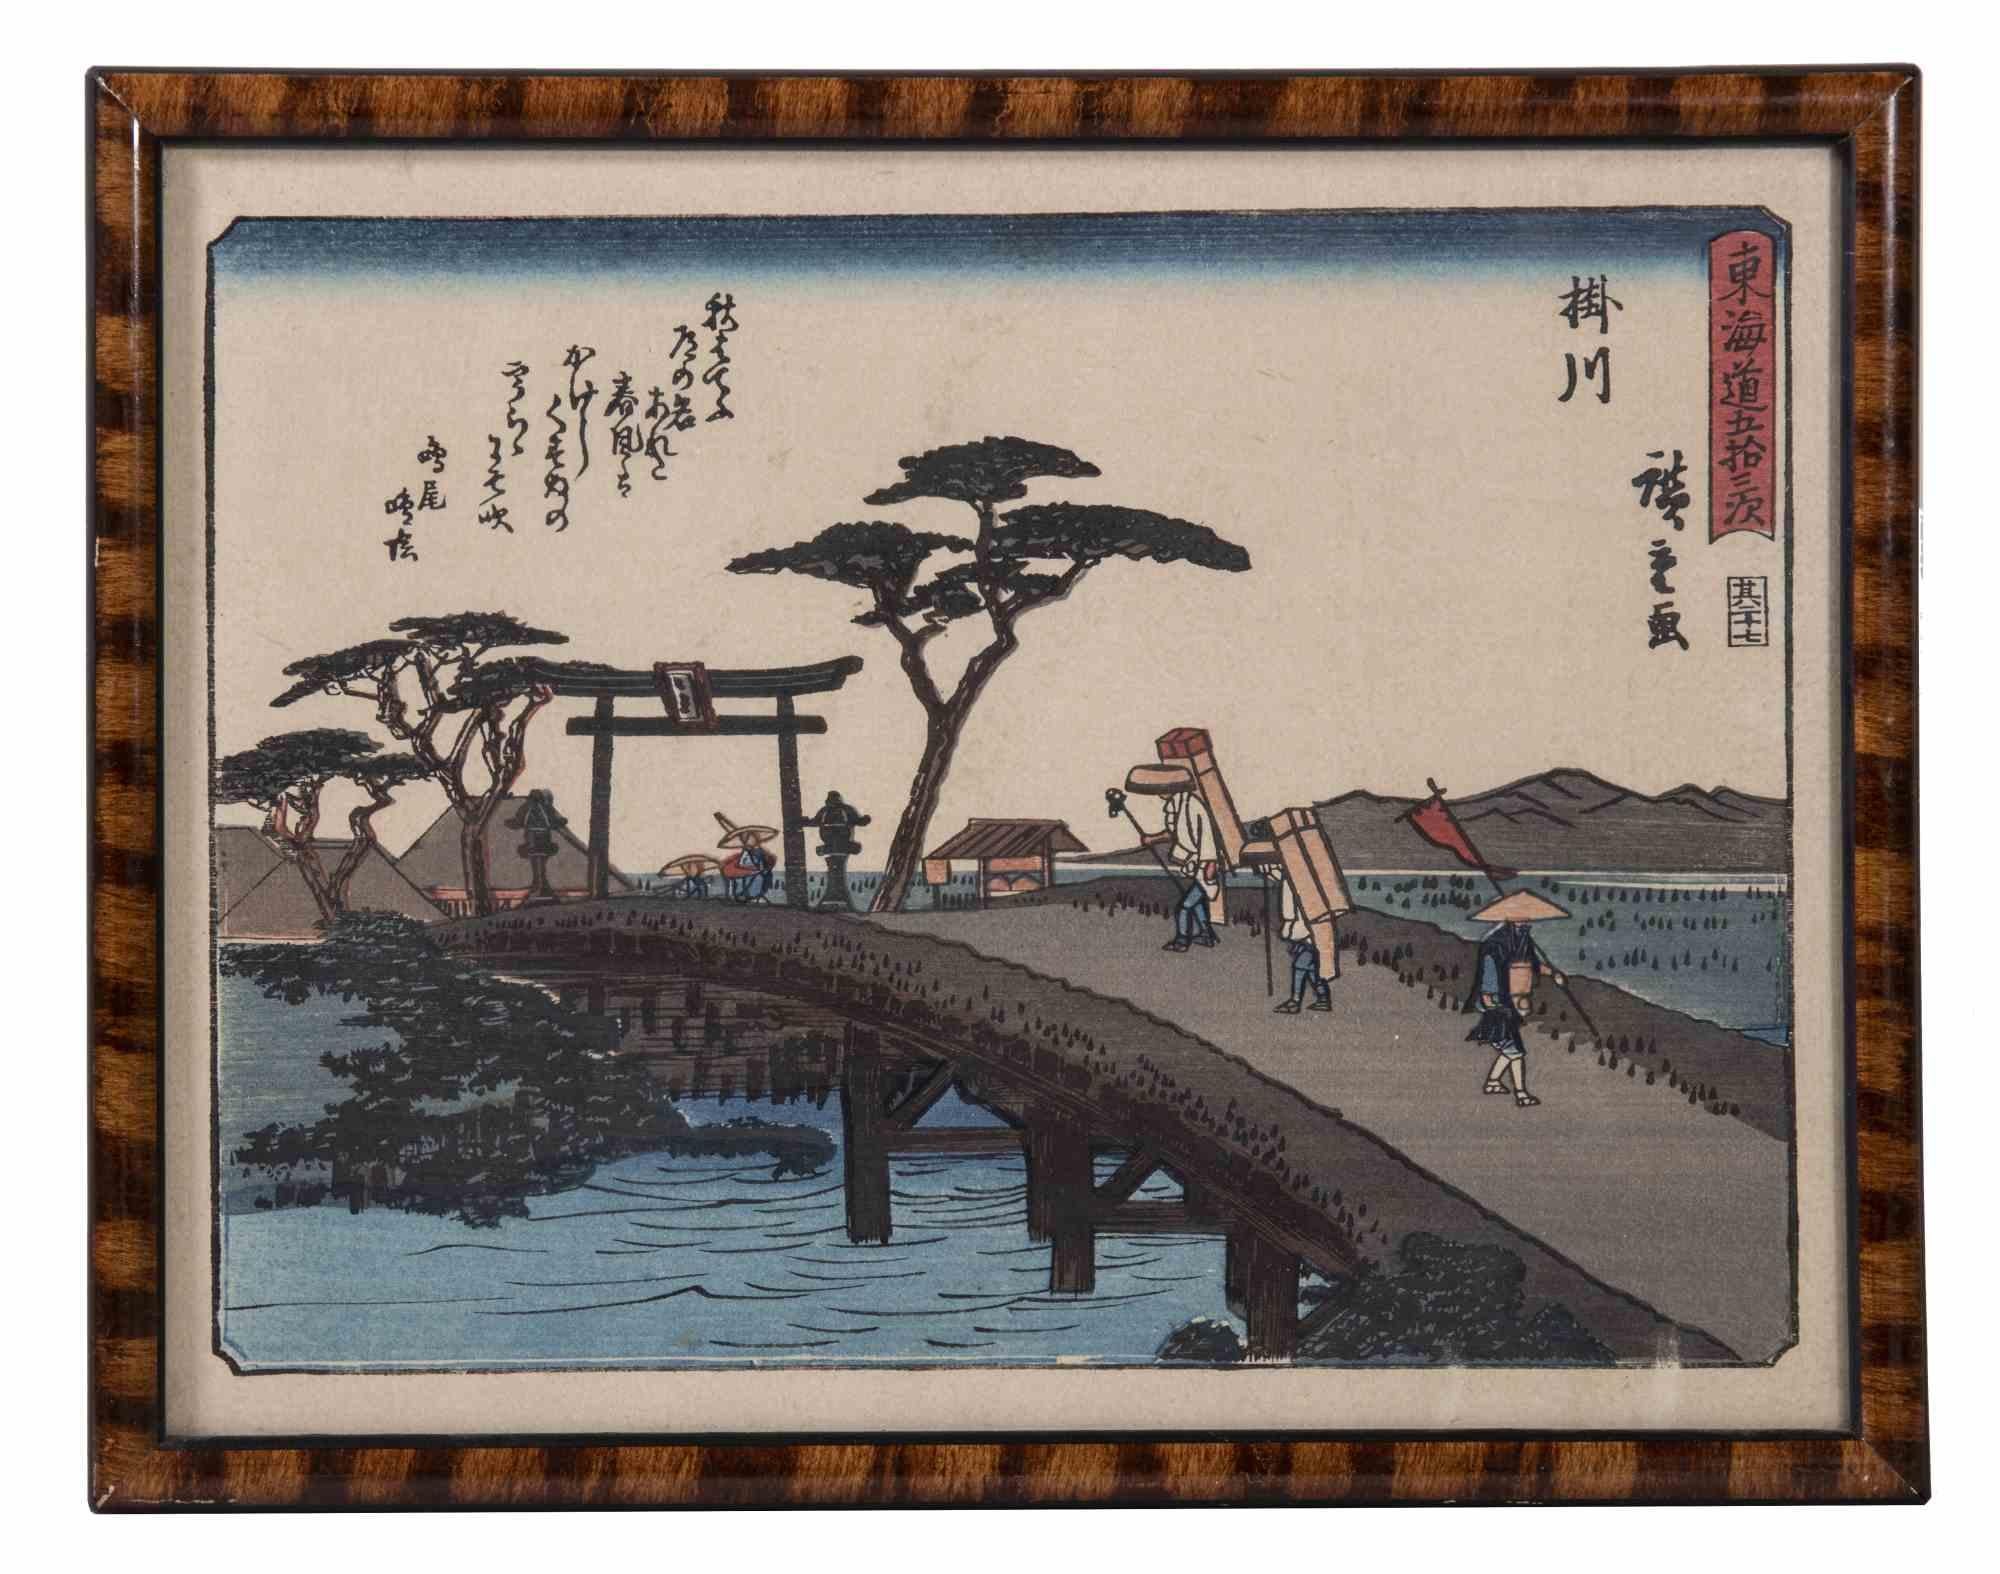 Kakegawa is an original modern artwork realized after Utagawa Hiroshige in the late 19th century.

Original woodcut print from "53 Stations of the Tokaido". Sheet dimensions: 21 x 27 cm. Frame is included.

Very good conditions. 

Utagawa Hiroshige